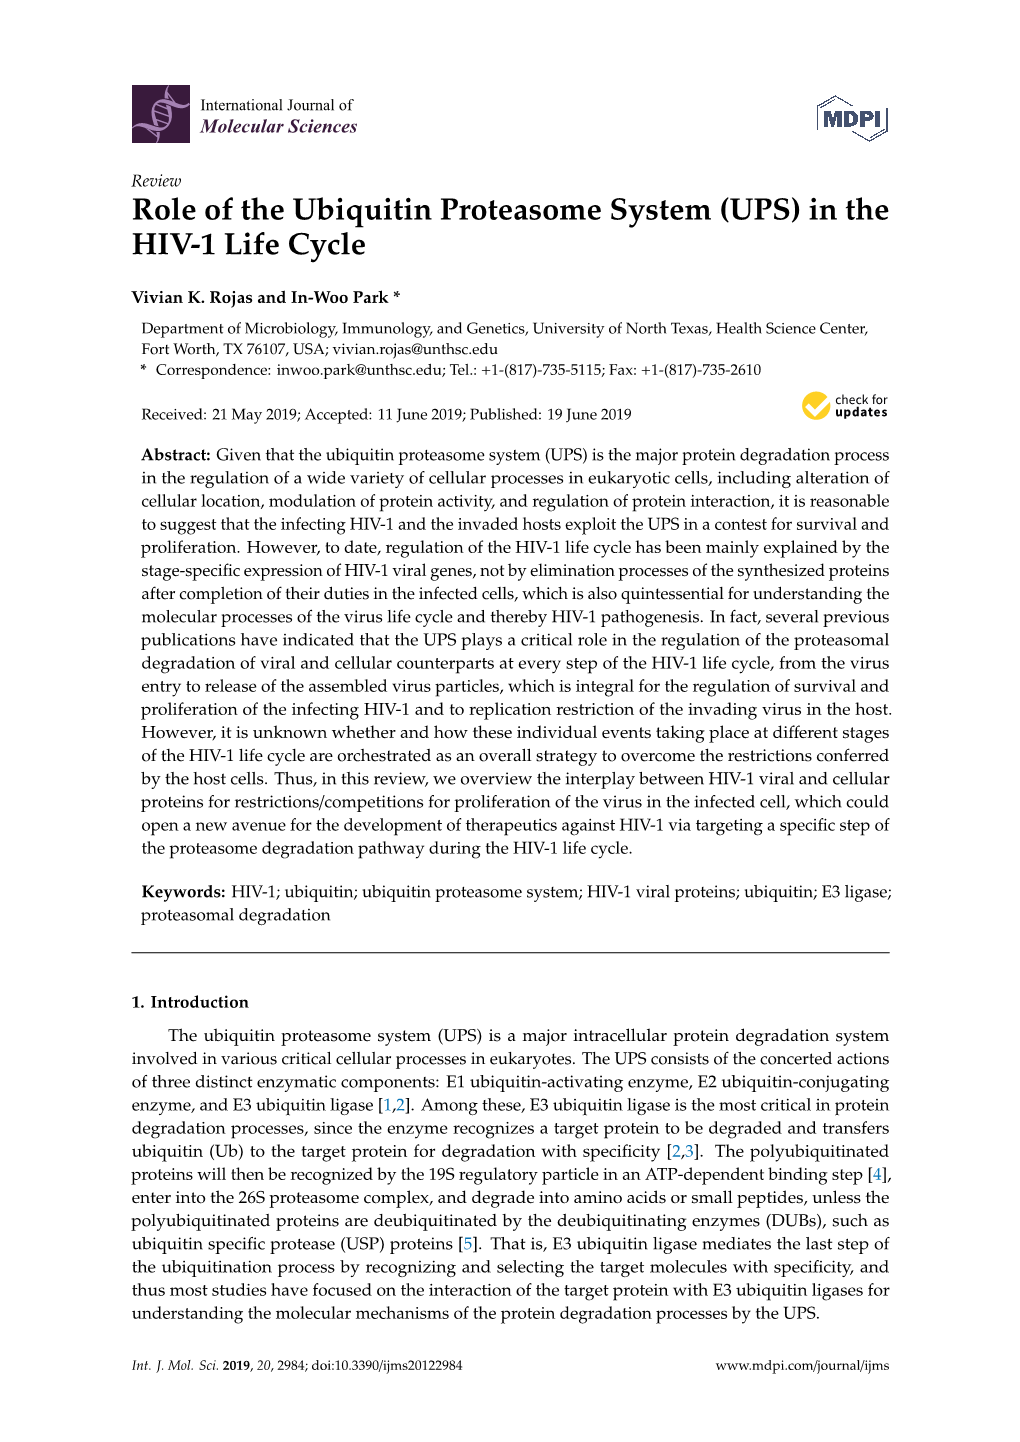 Role of the Ubiquitin Proteasome System (UPS) in the HIV-1 Life Cycle